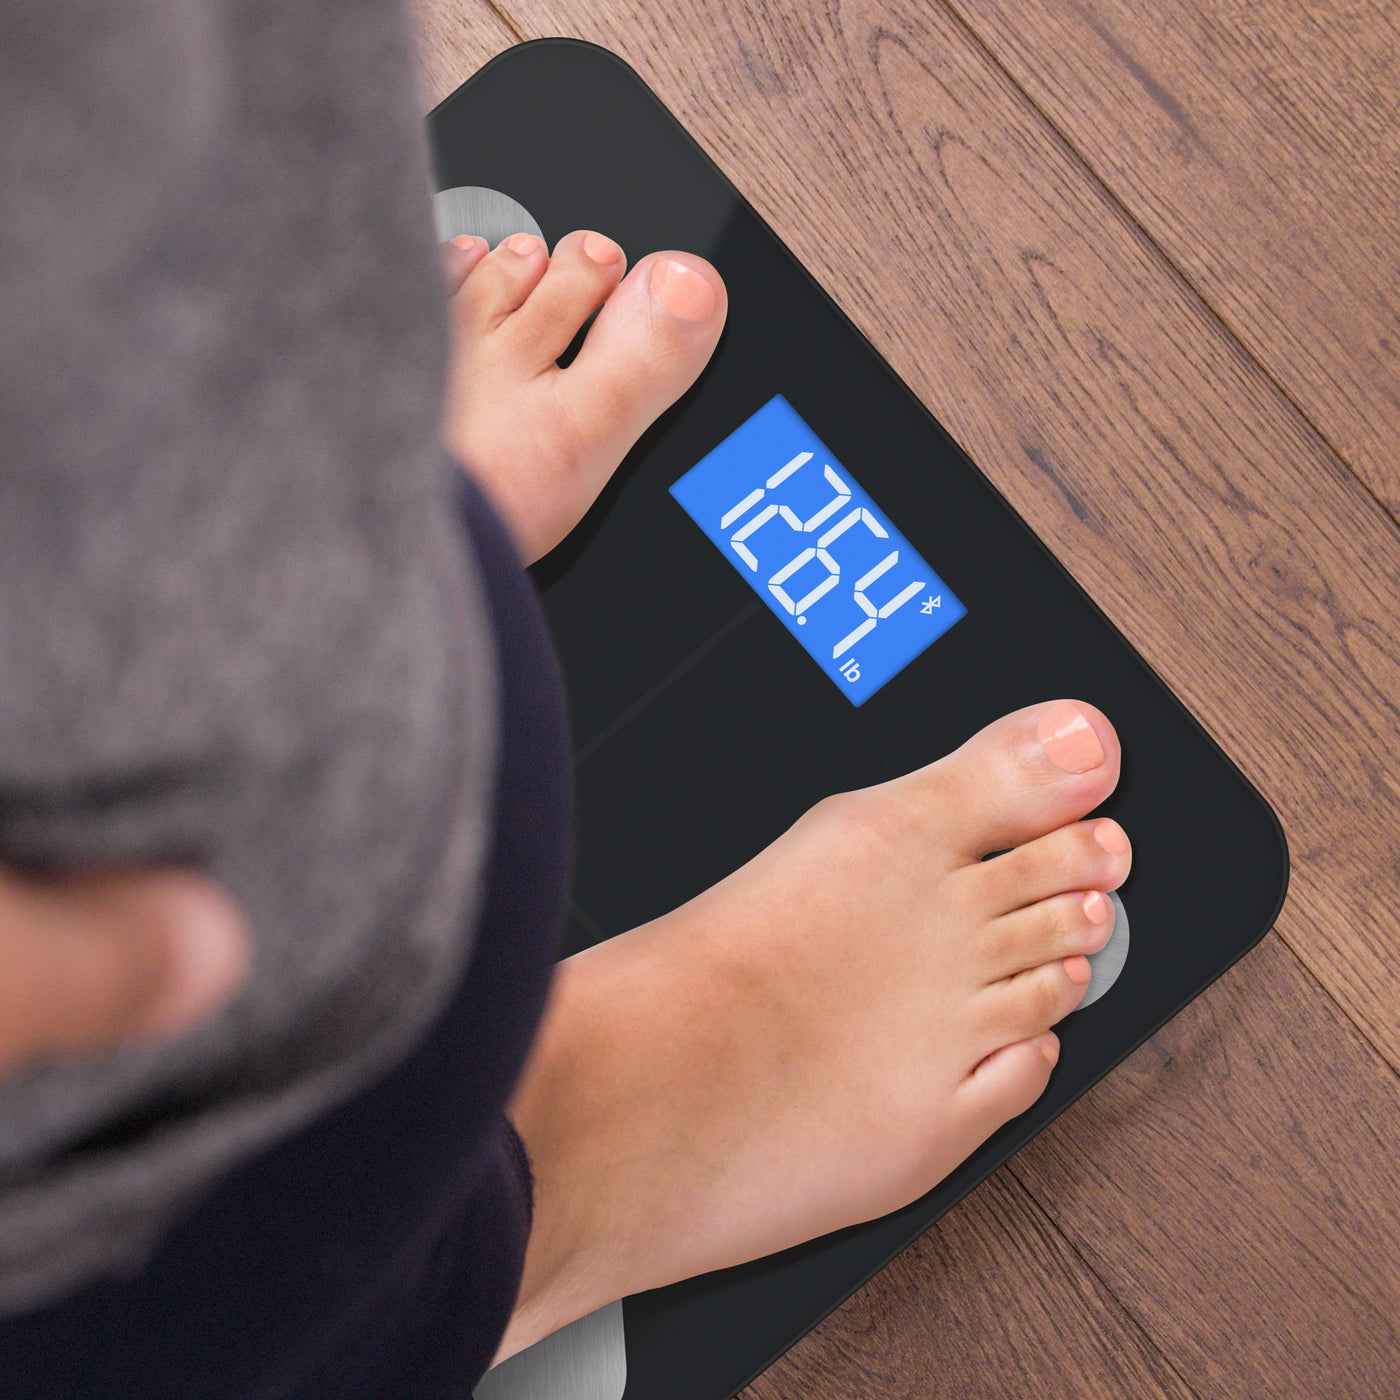  Greater Goods Bluetooth Connected Bathroom Smart Scale,  Measures & Tracks BMI, Lean Mass, Water Weight, & Bone Mass, Extra-Large,  Backlit LCD Screen, Auto-Calibration & Auto-Off : Health & Household